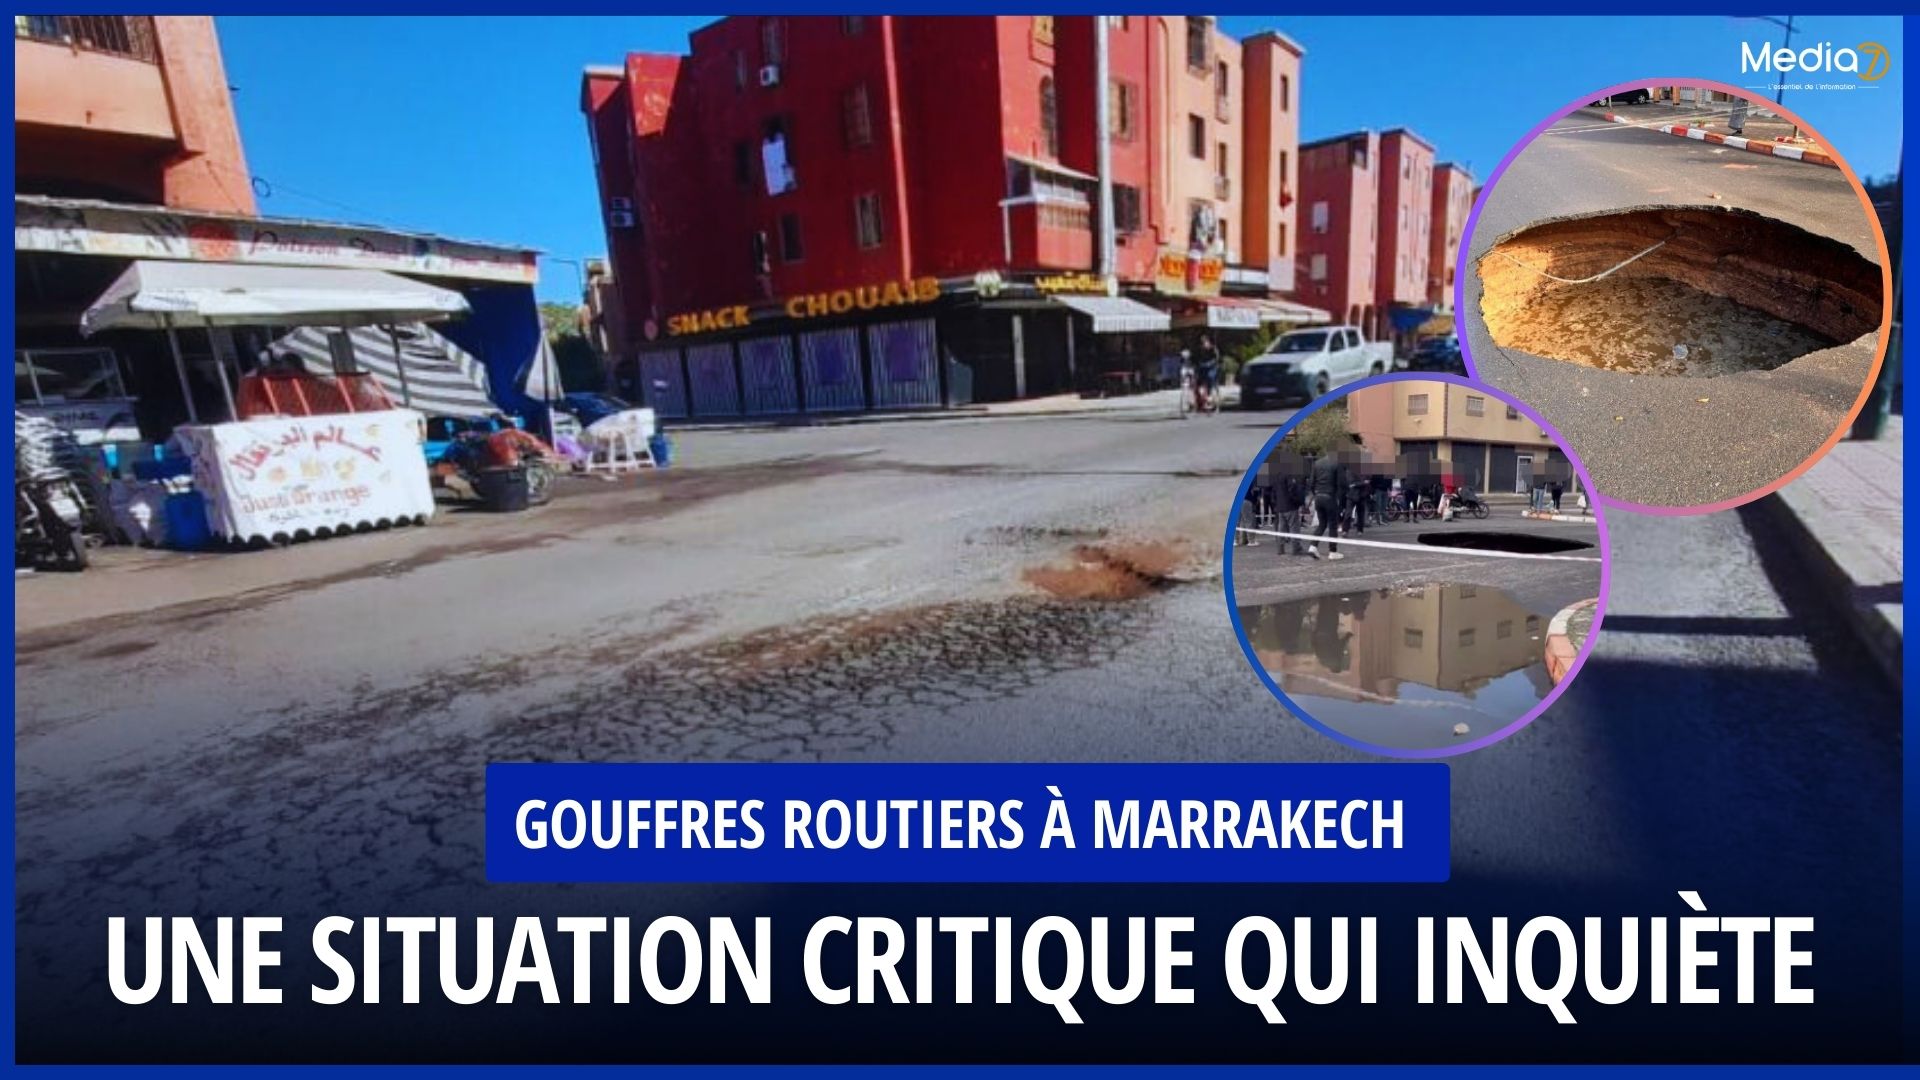 Marrakech under threat: Road sinkholes endanger the safety of residents